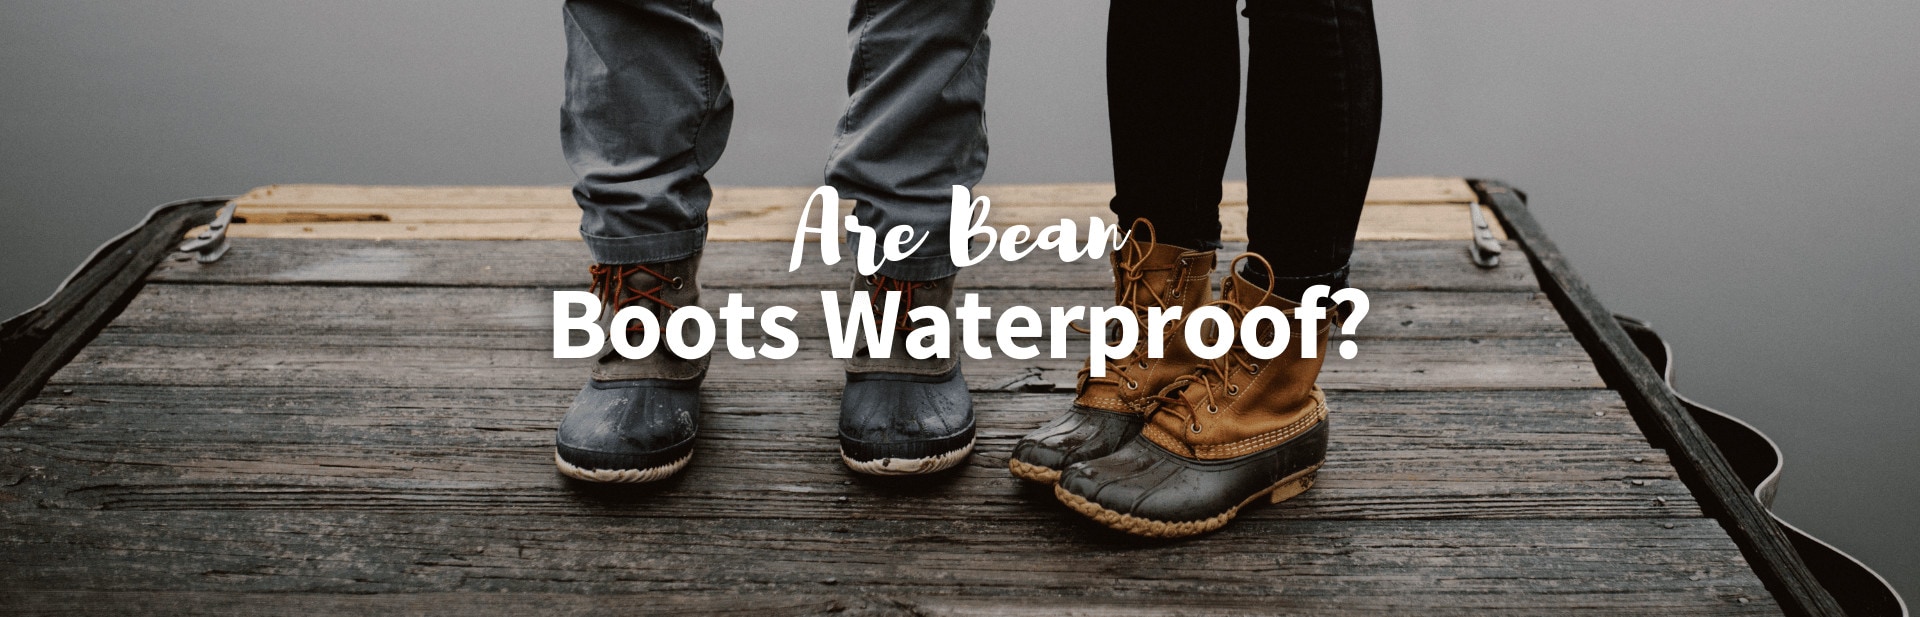 Are Bean Boots Waterproof?